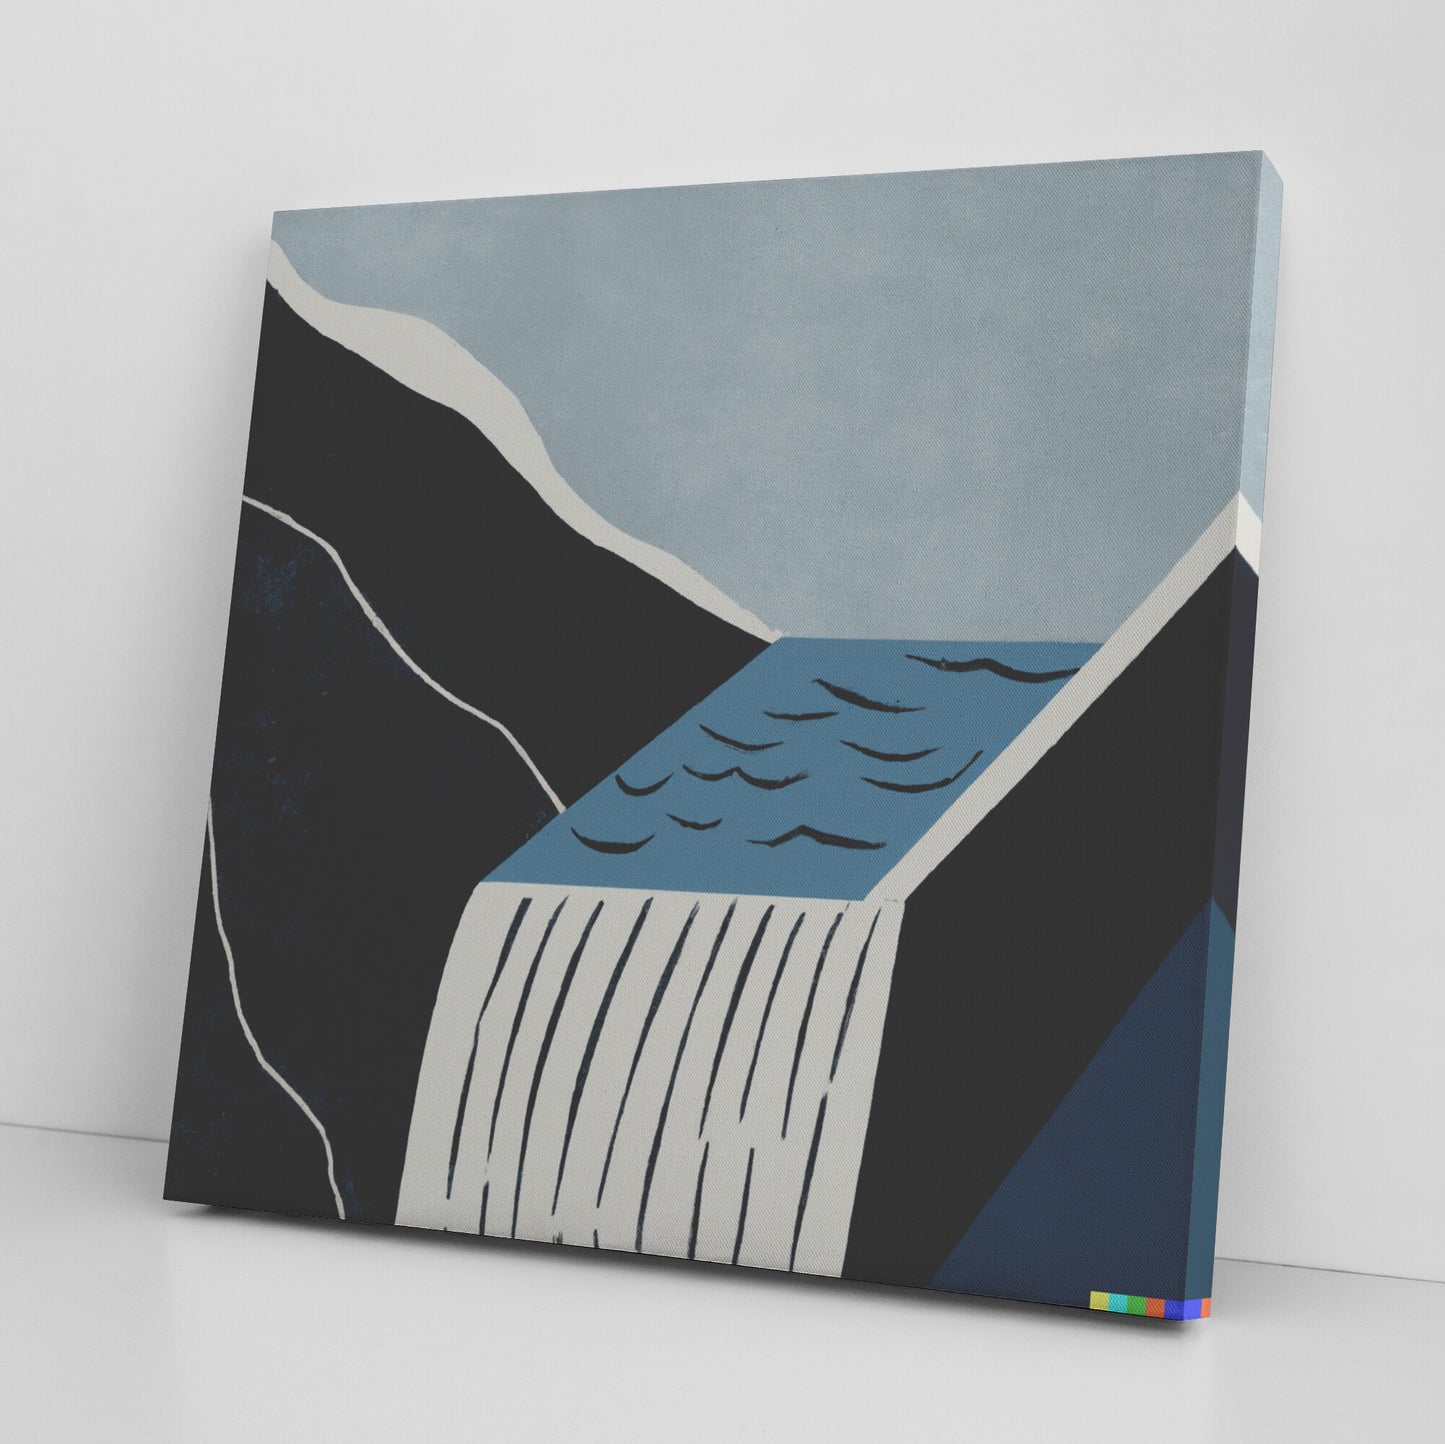 One-Of-A-Kind, NFT Backed, Abstract Portrait of a Waterfall